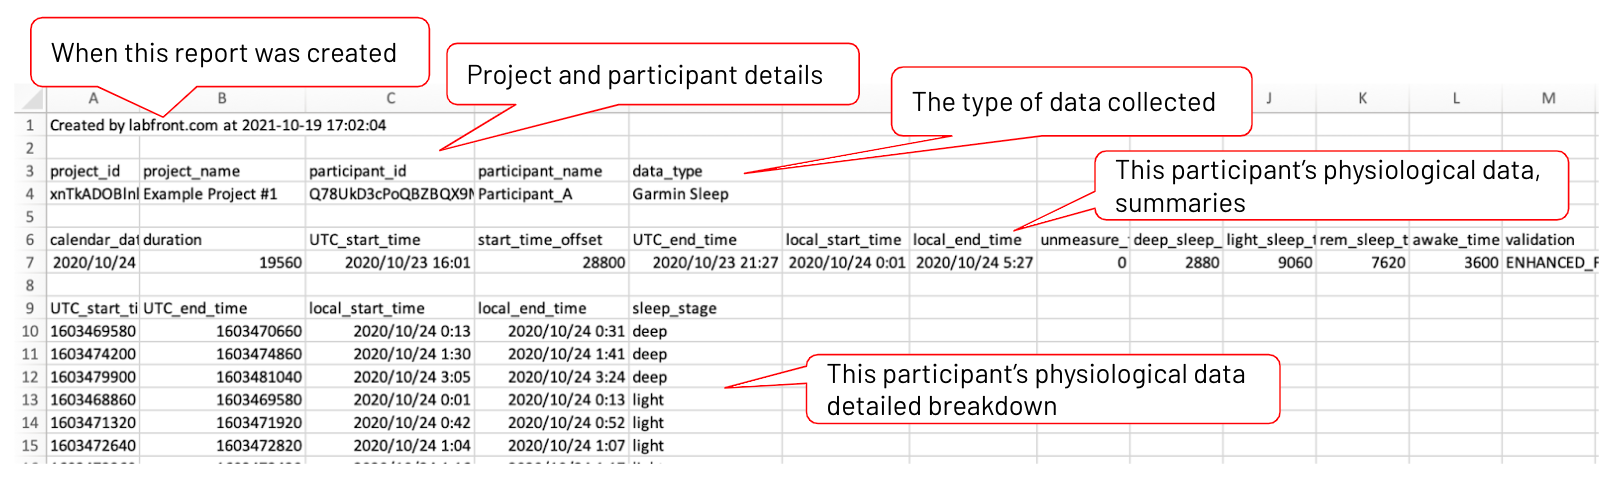 CSV file of sleep data with date, project and participant details, type of data collected and summaries of physiological data